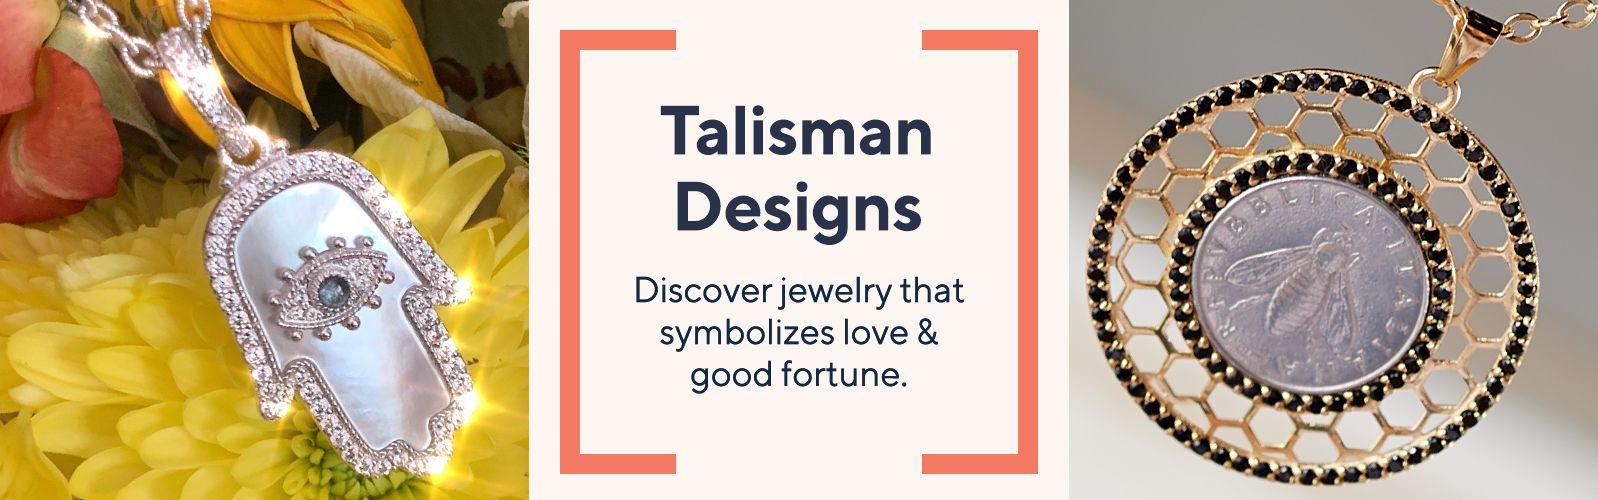 Talisman Designs - Discover jewelry that symbolizes love & good fortune. 